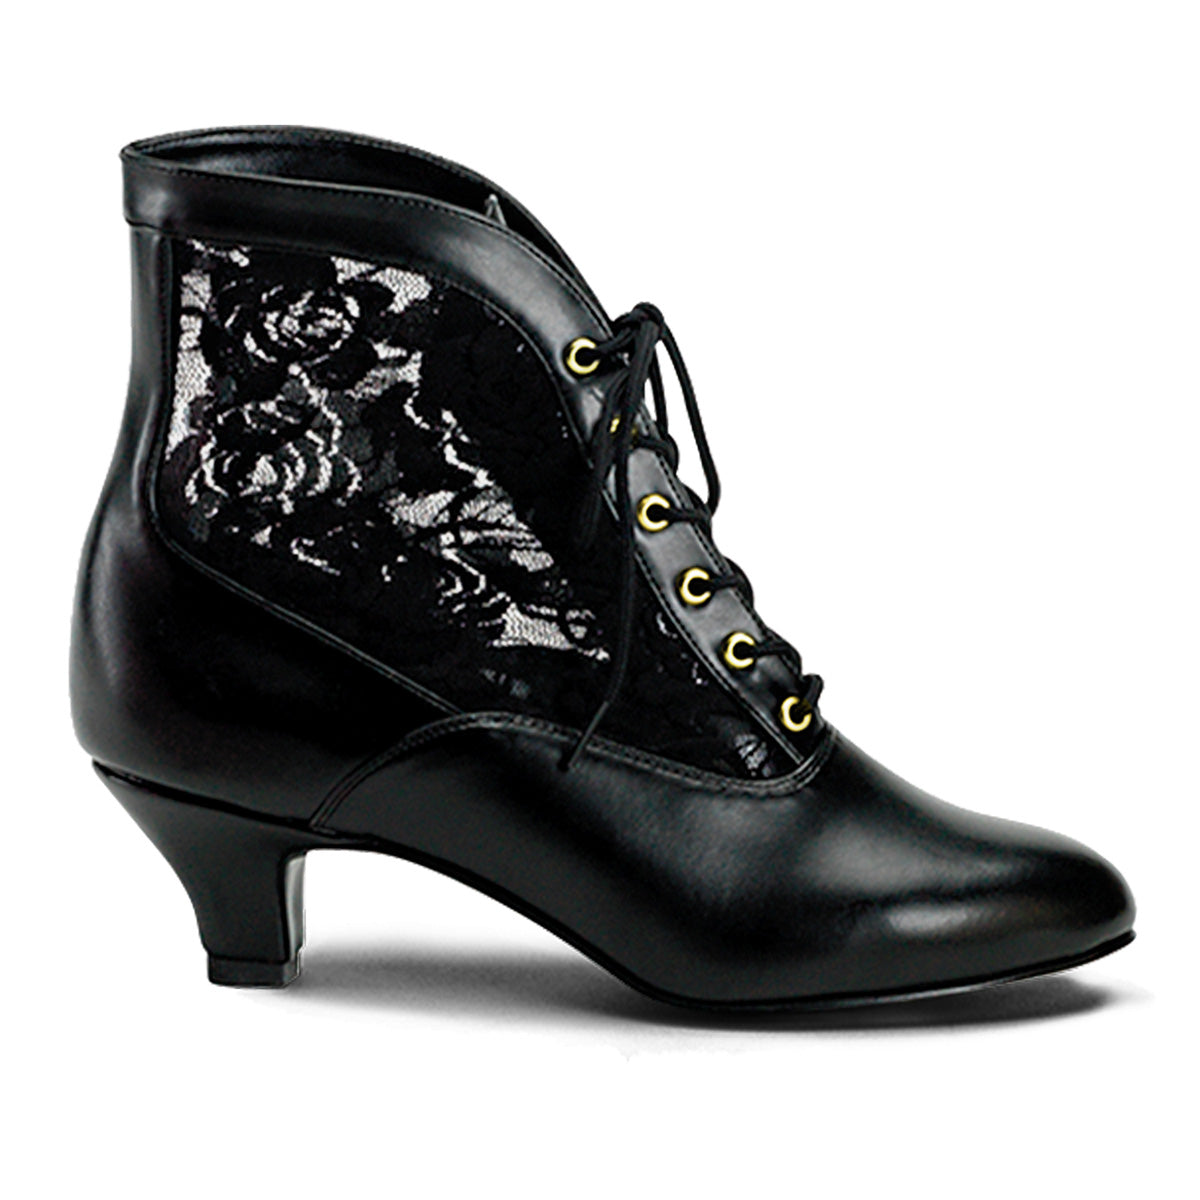 DAME-05 Black Ankle Boots Black Multi view 1